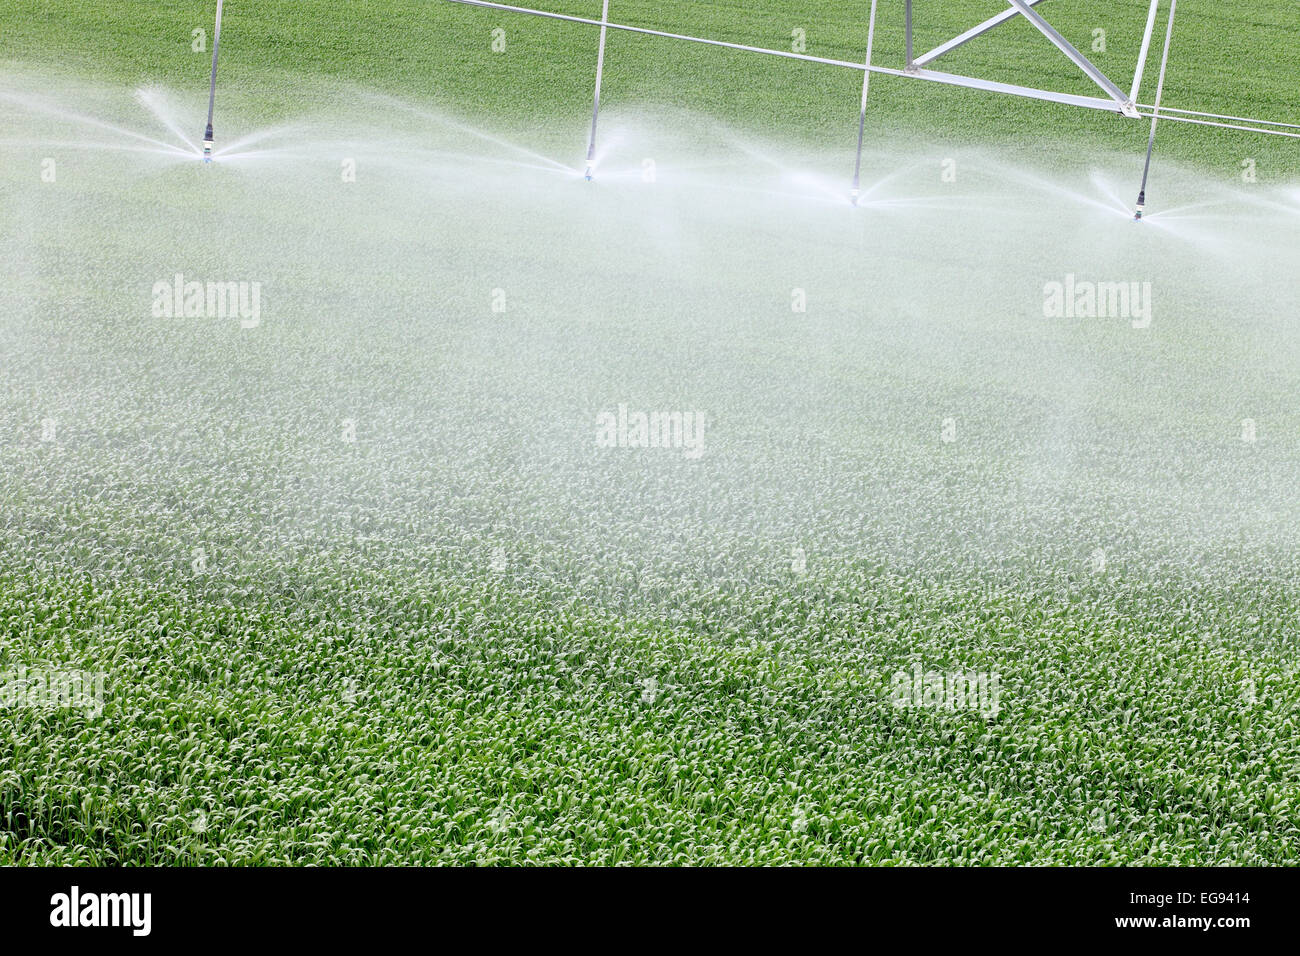 A closeup view of a high tech agricultural sprinkler head watering farm crops. Stock Photo